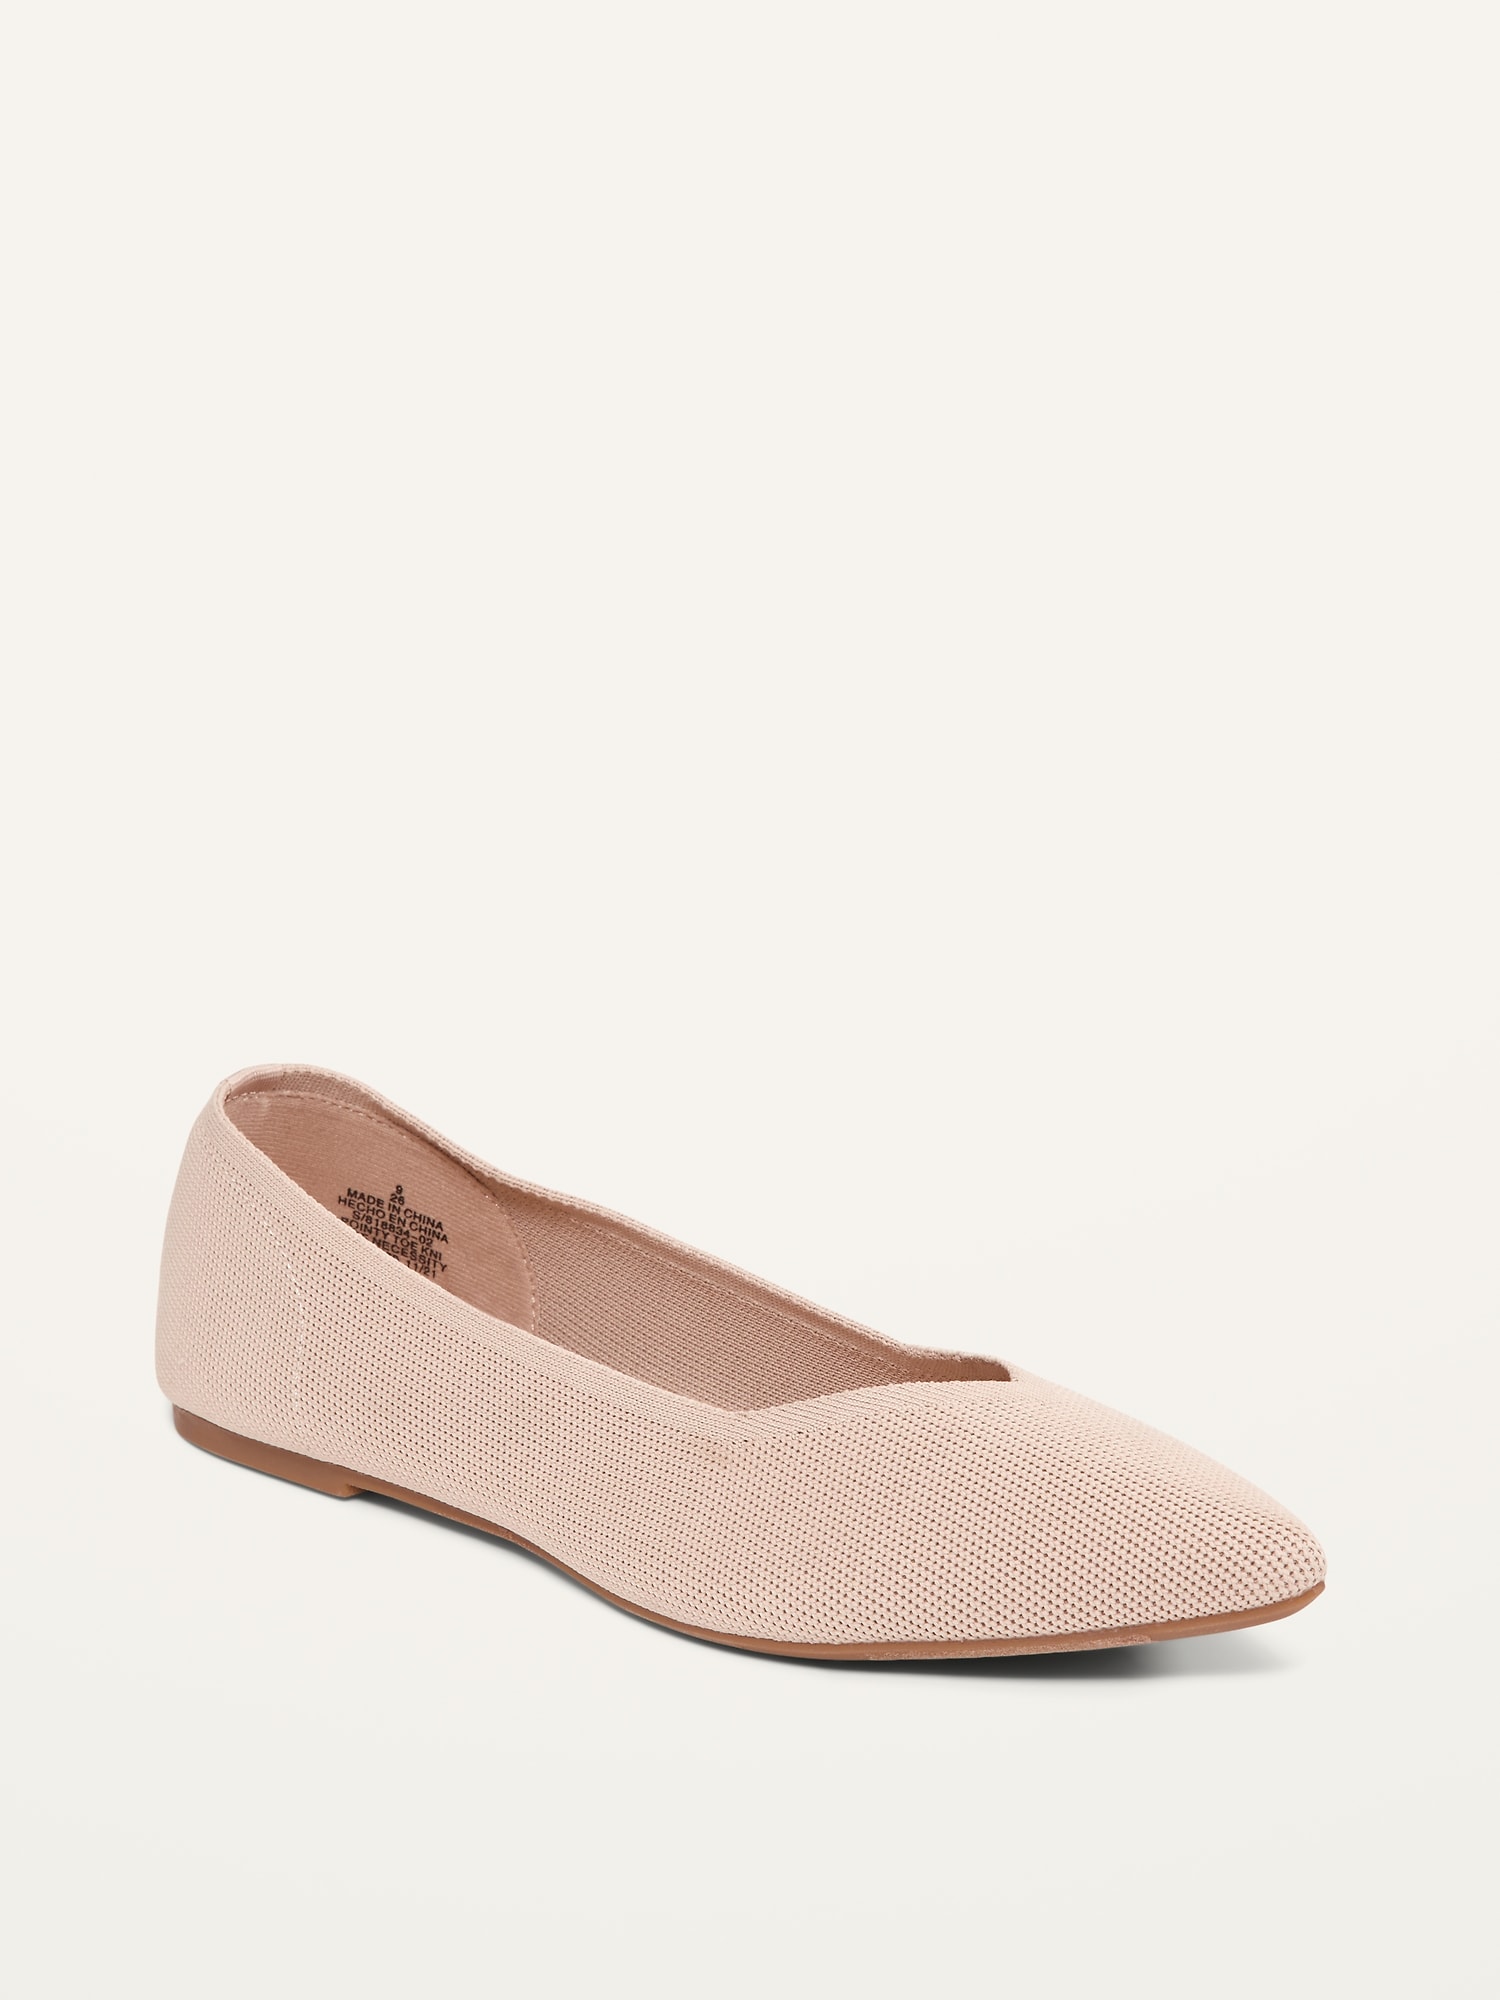 Synthetic Ballet Flats | Old Navy